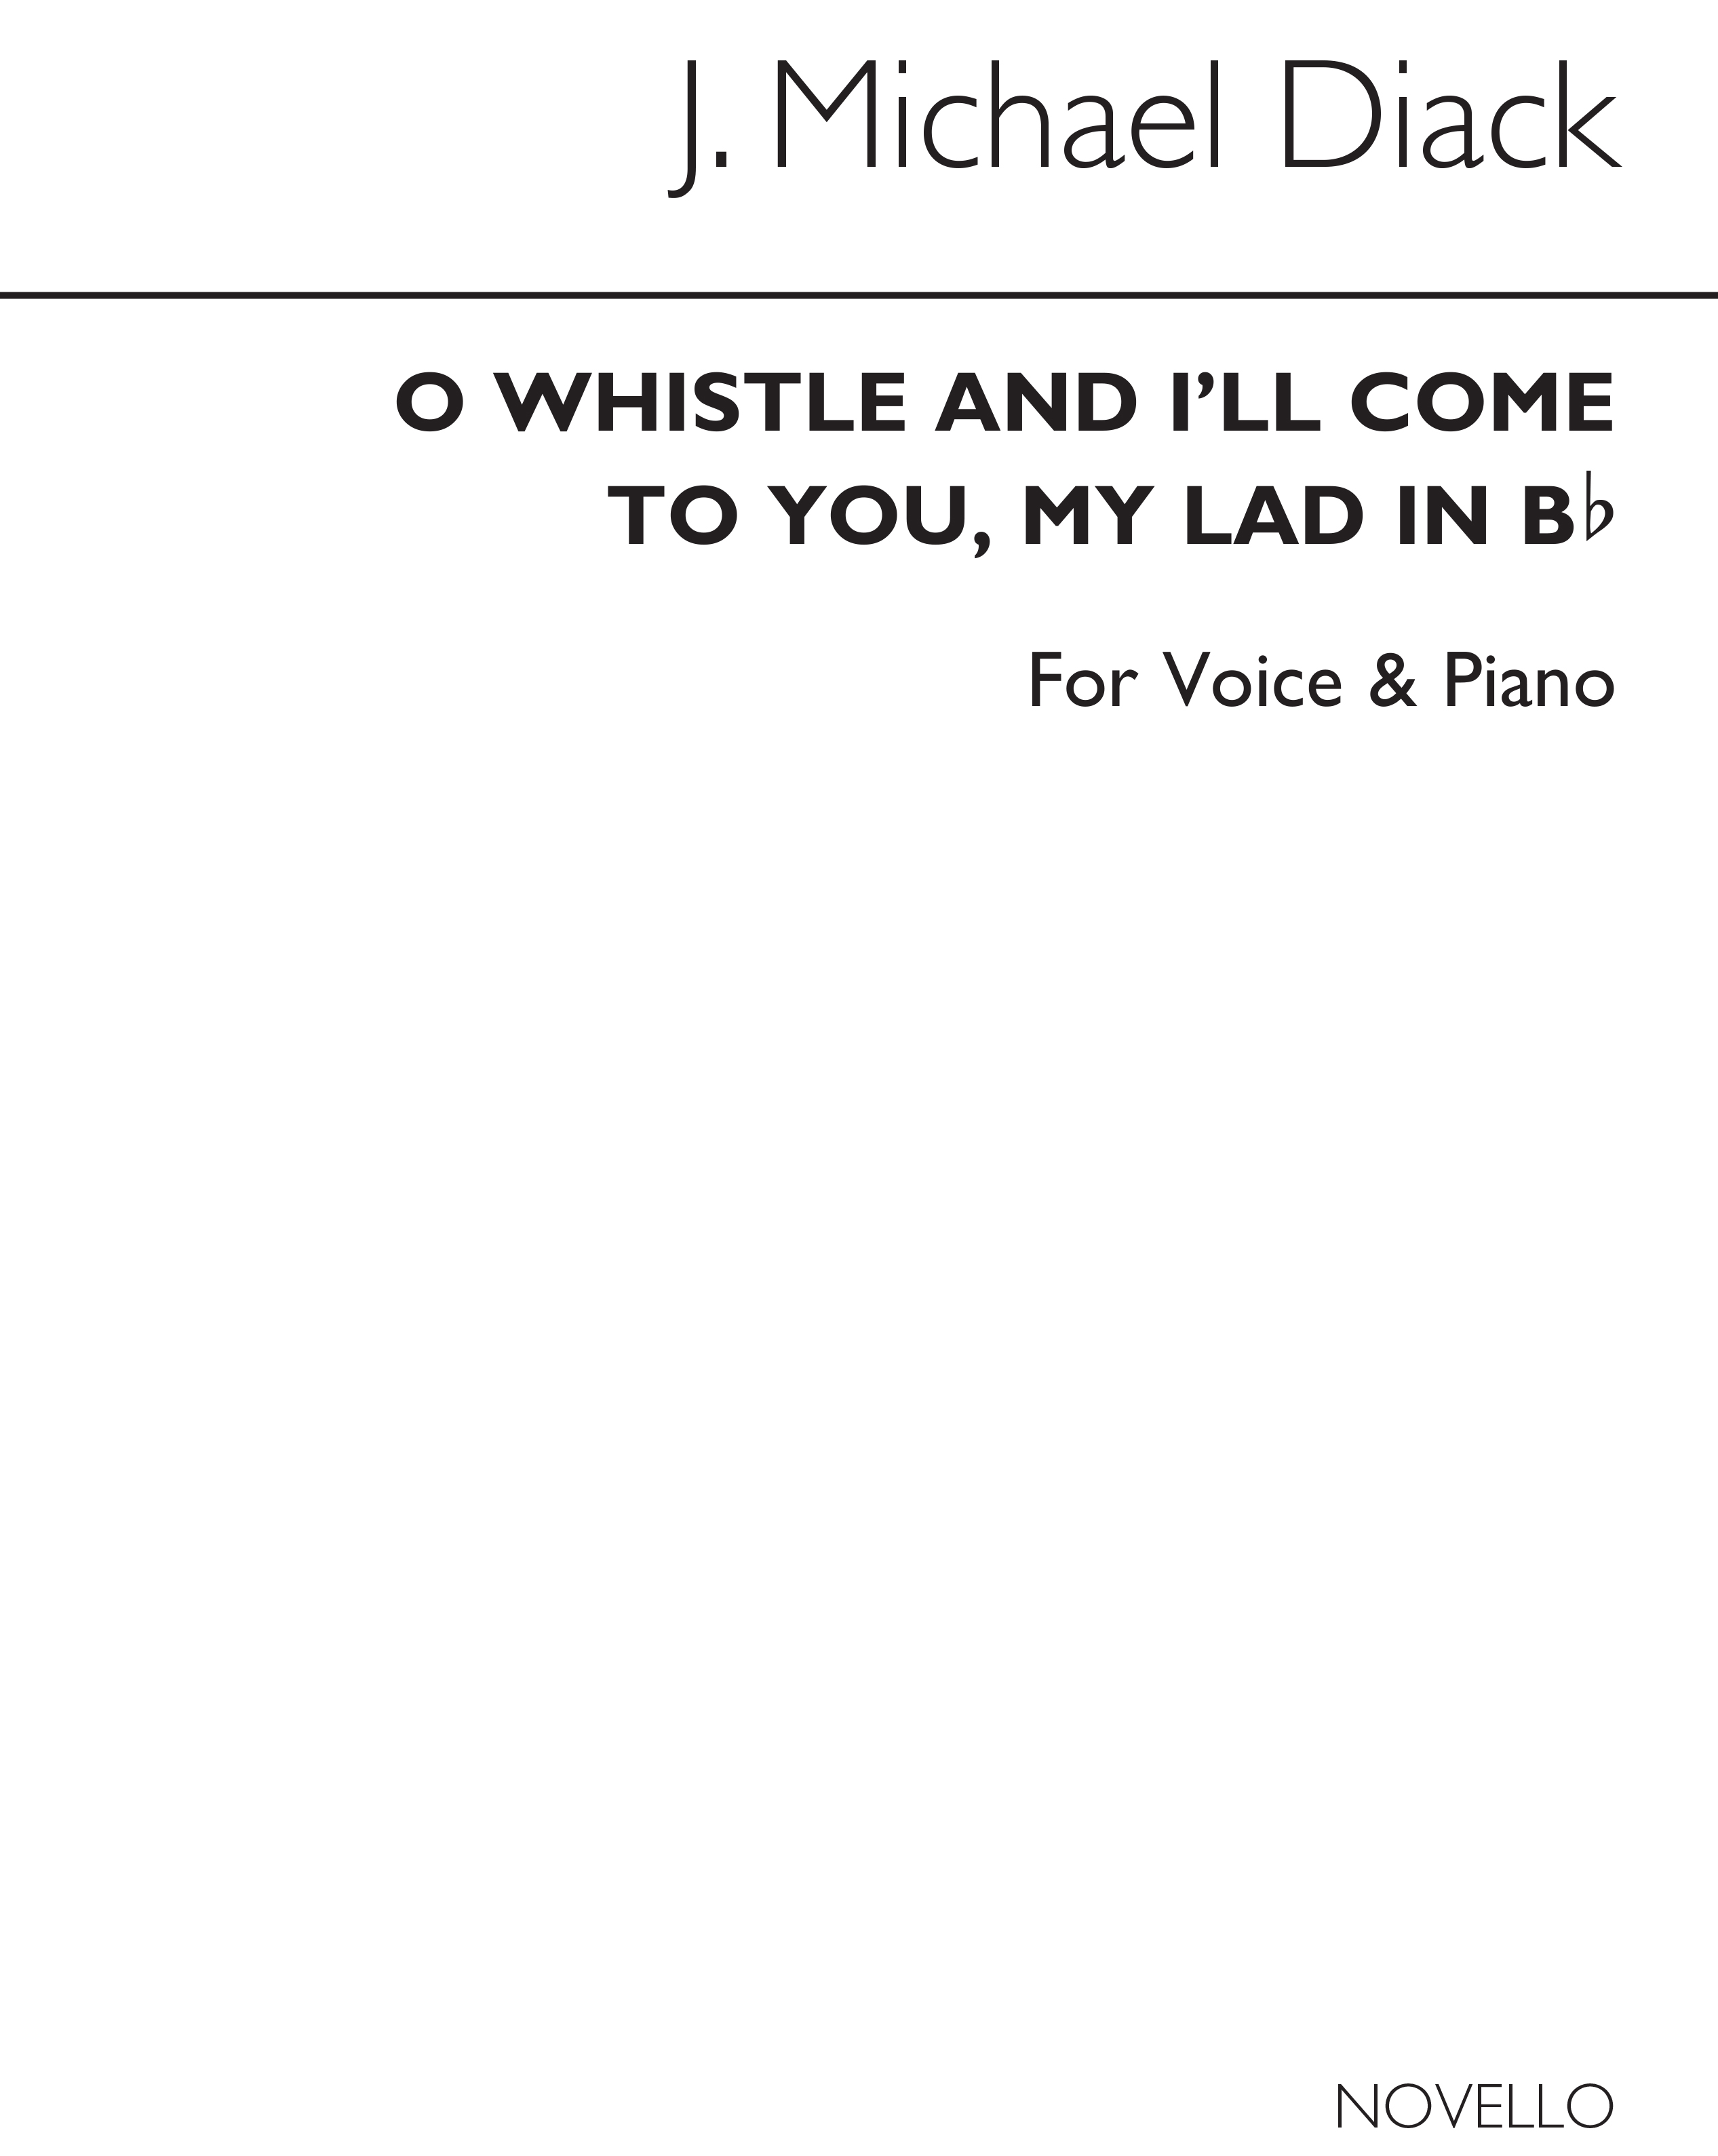 J. Michael Diack: O Whistle And I'll Come To You, My Lad-high Vce/Pf (Key-b Flat